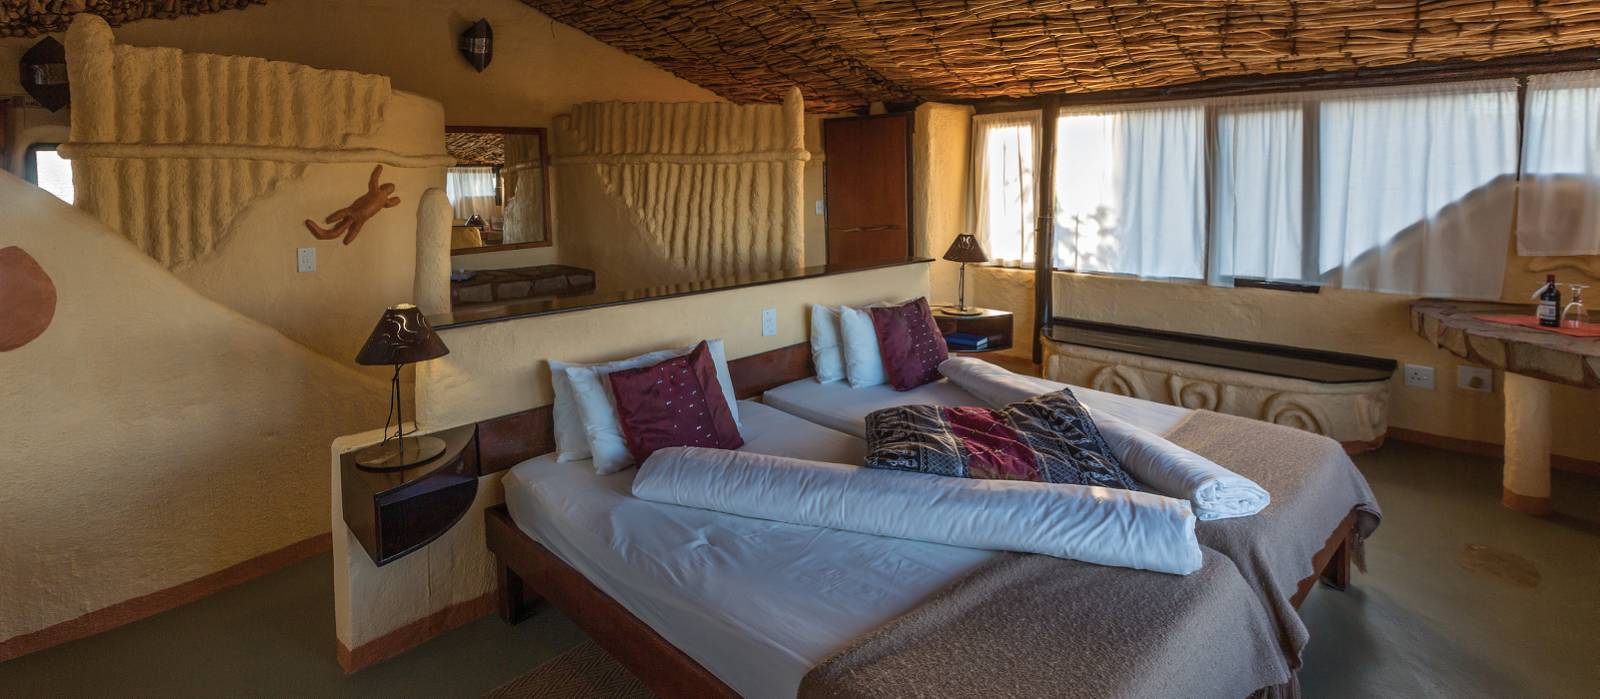 Accommodation in Swakopmund on the 'African wilderness in comfort' trip |  <i>Peter Walton</i>